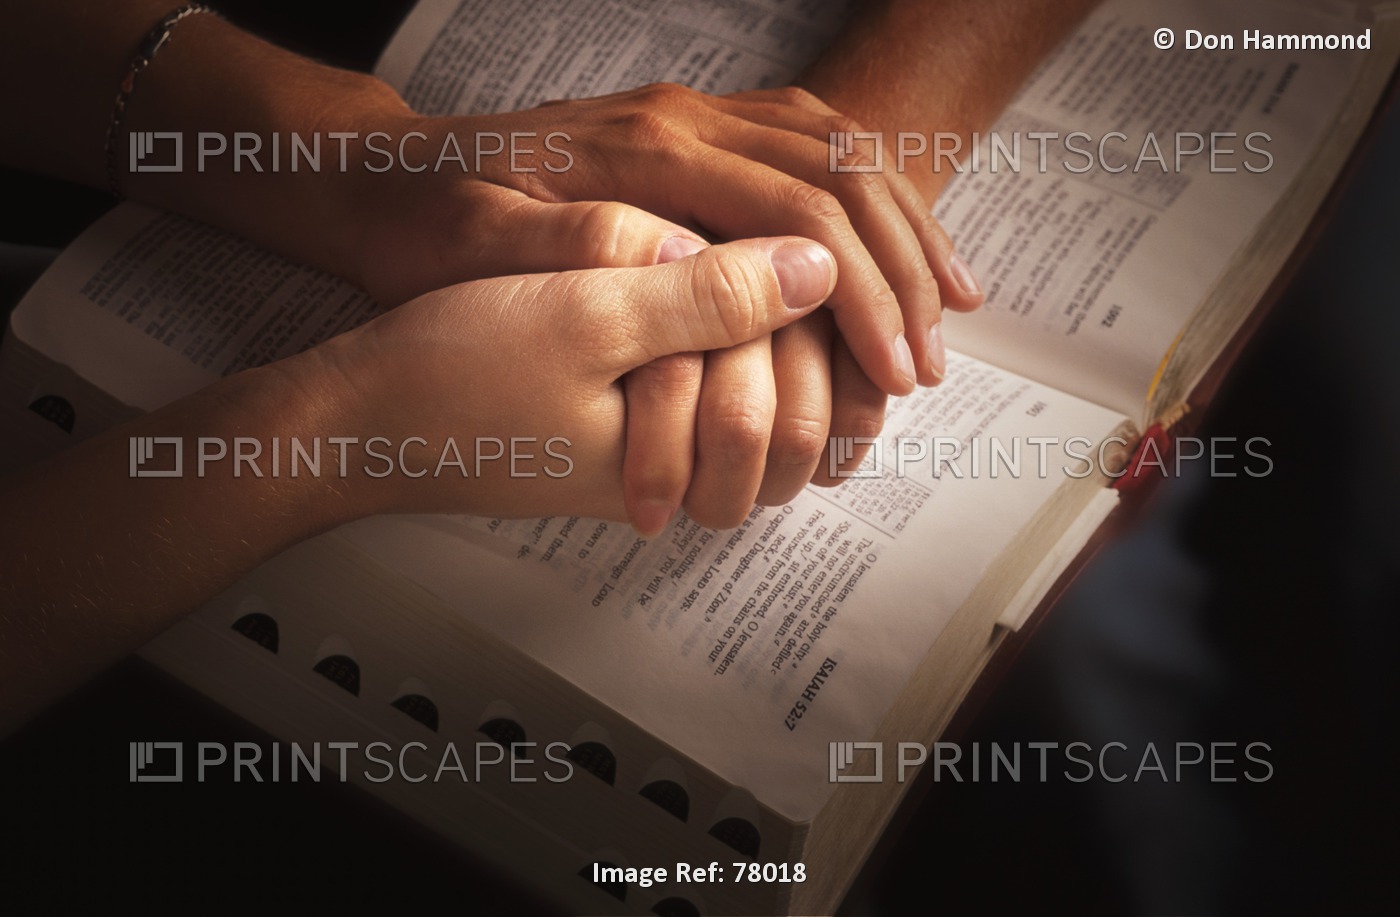 Holding Hands And Praying Over The Bible